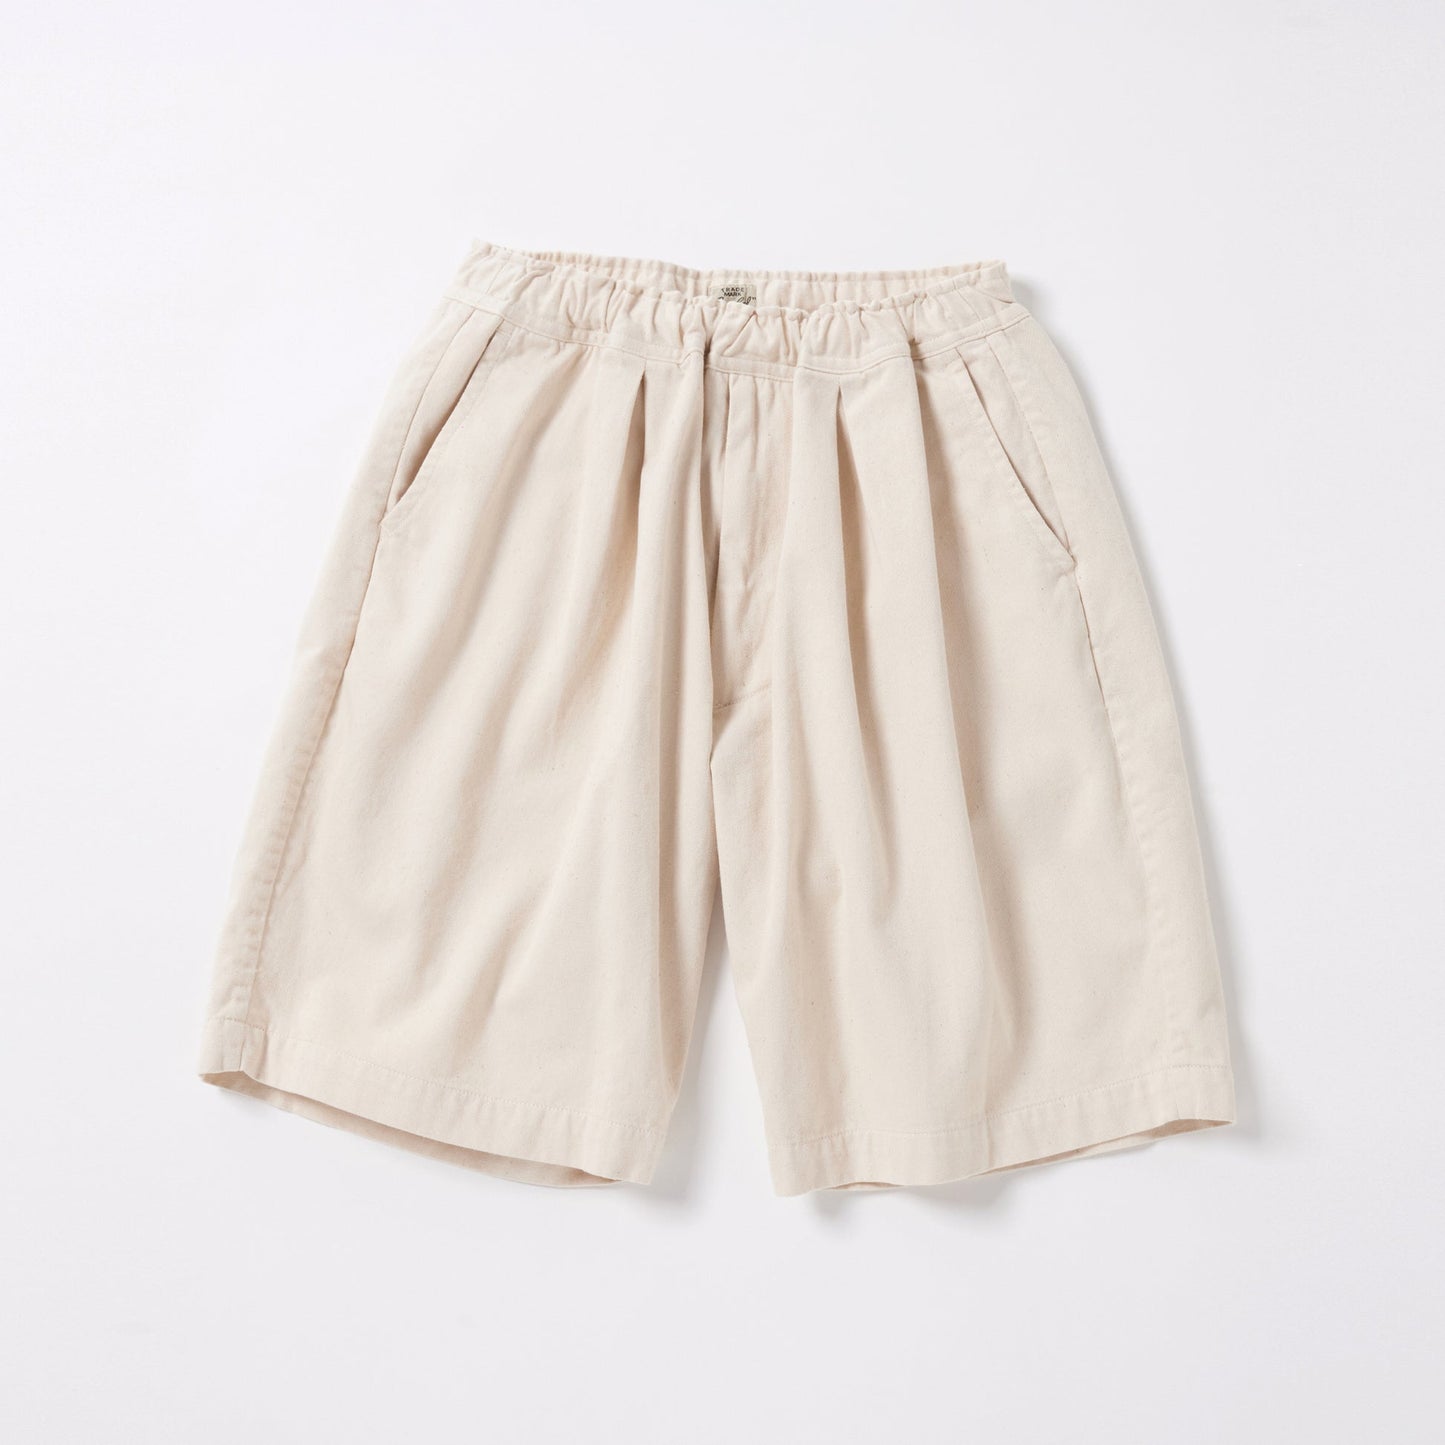 GOLD SELVEDGE WEAPON EASY SHORTS